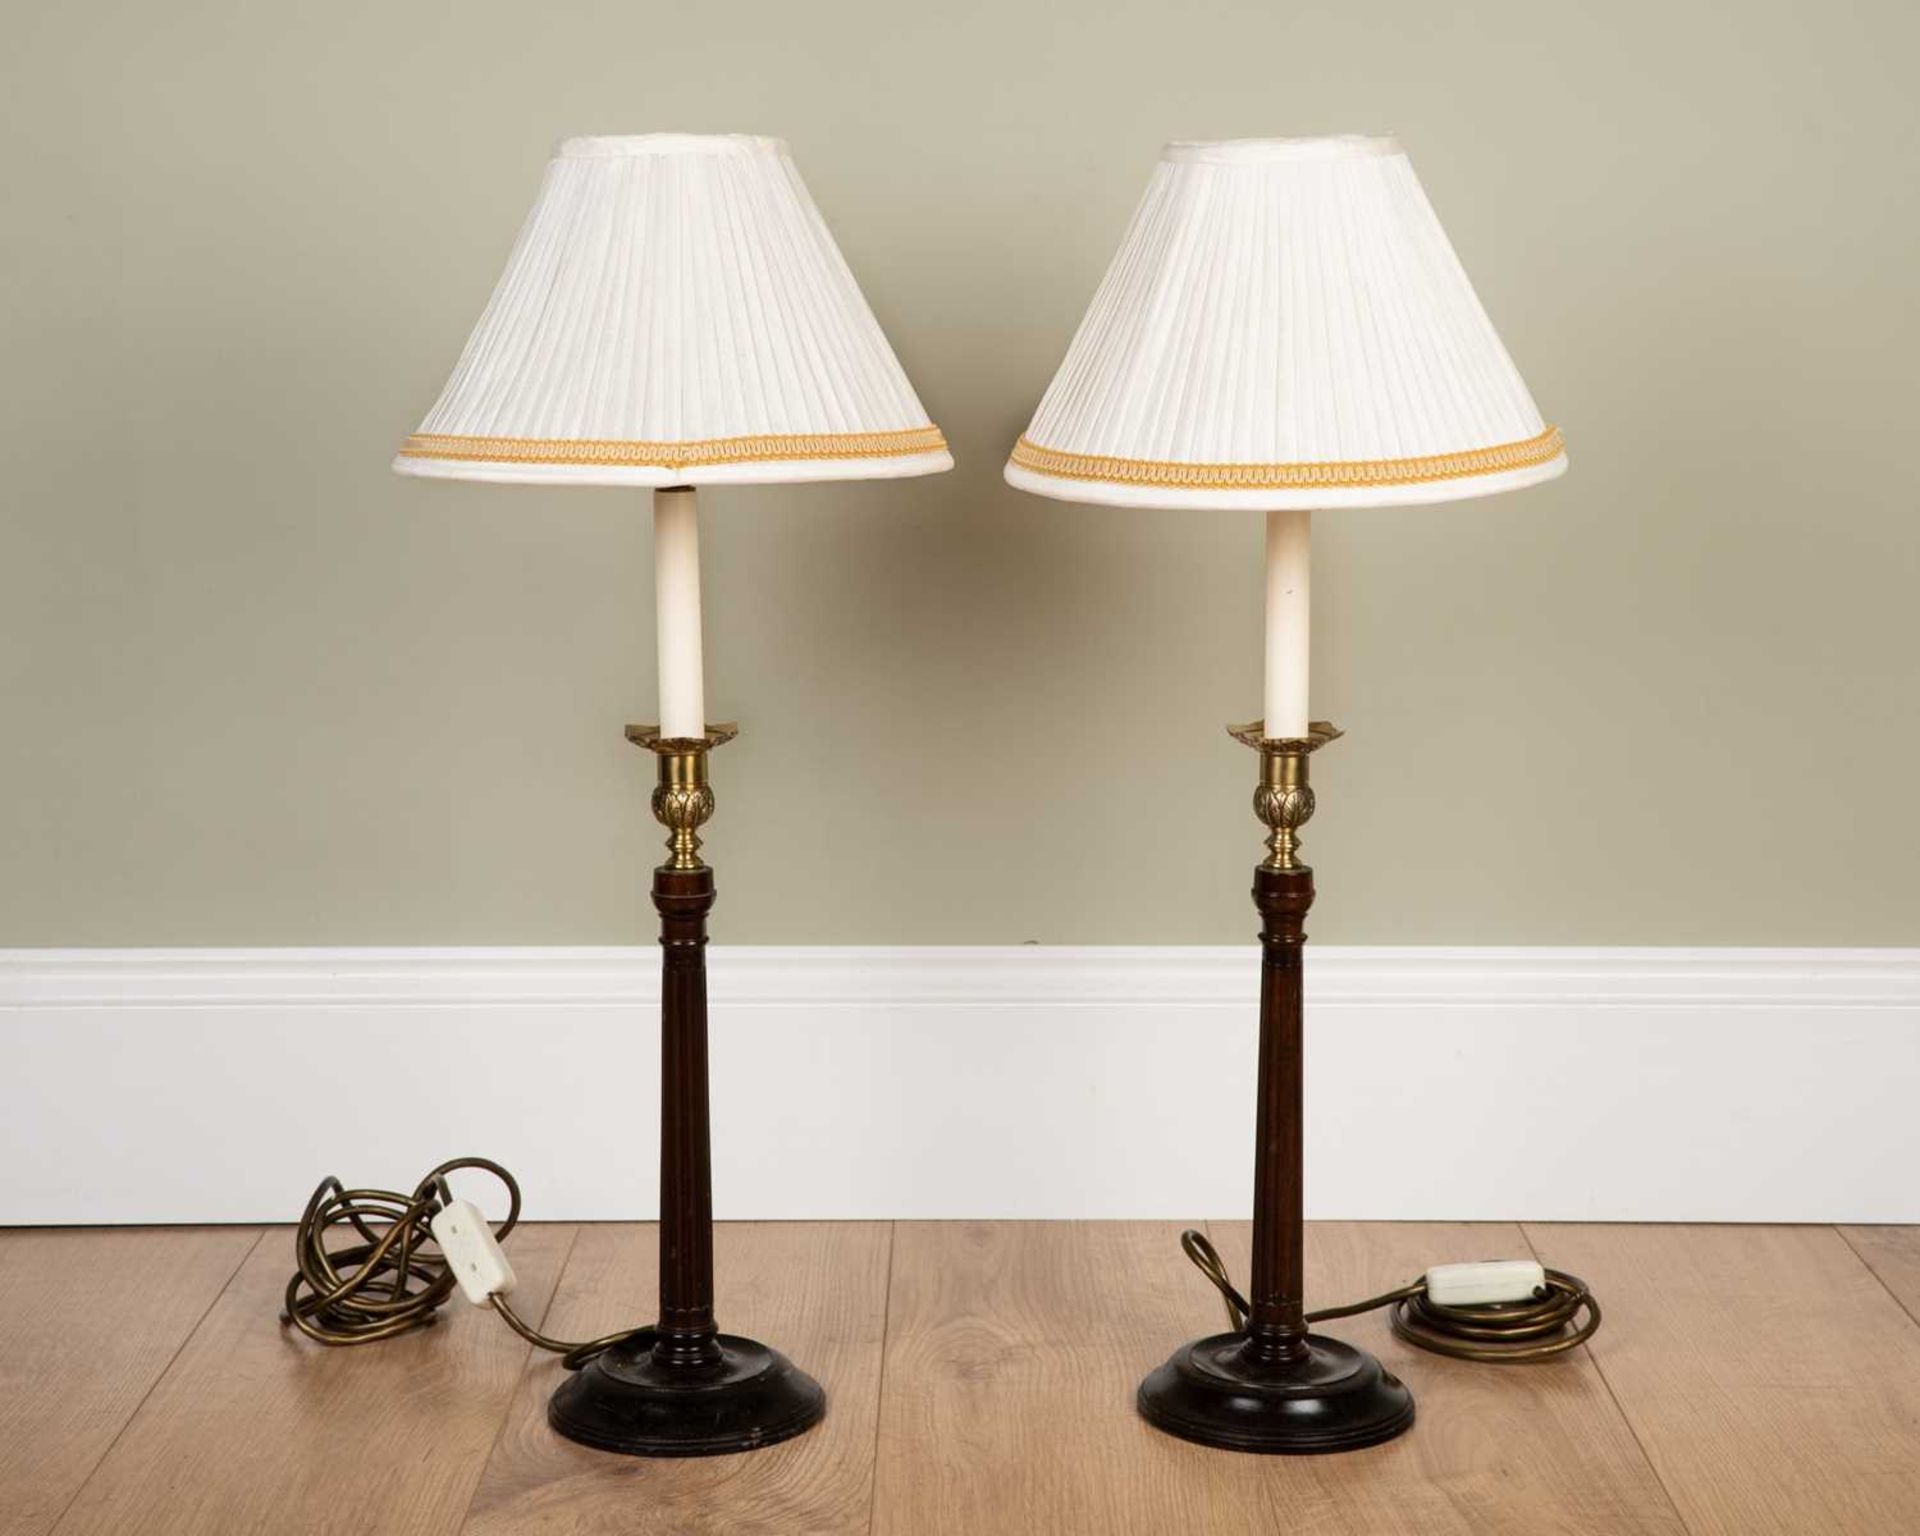 A pair of Georgian III-style mahogany and brass table lamps with fluted columns and spreaded